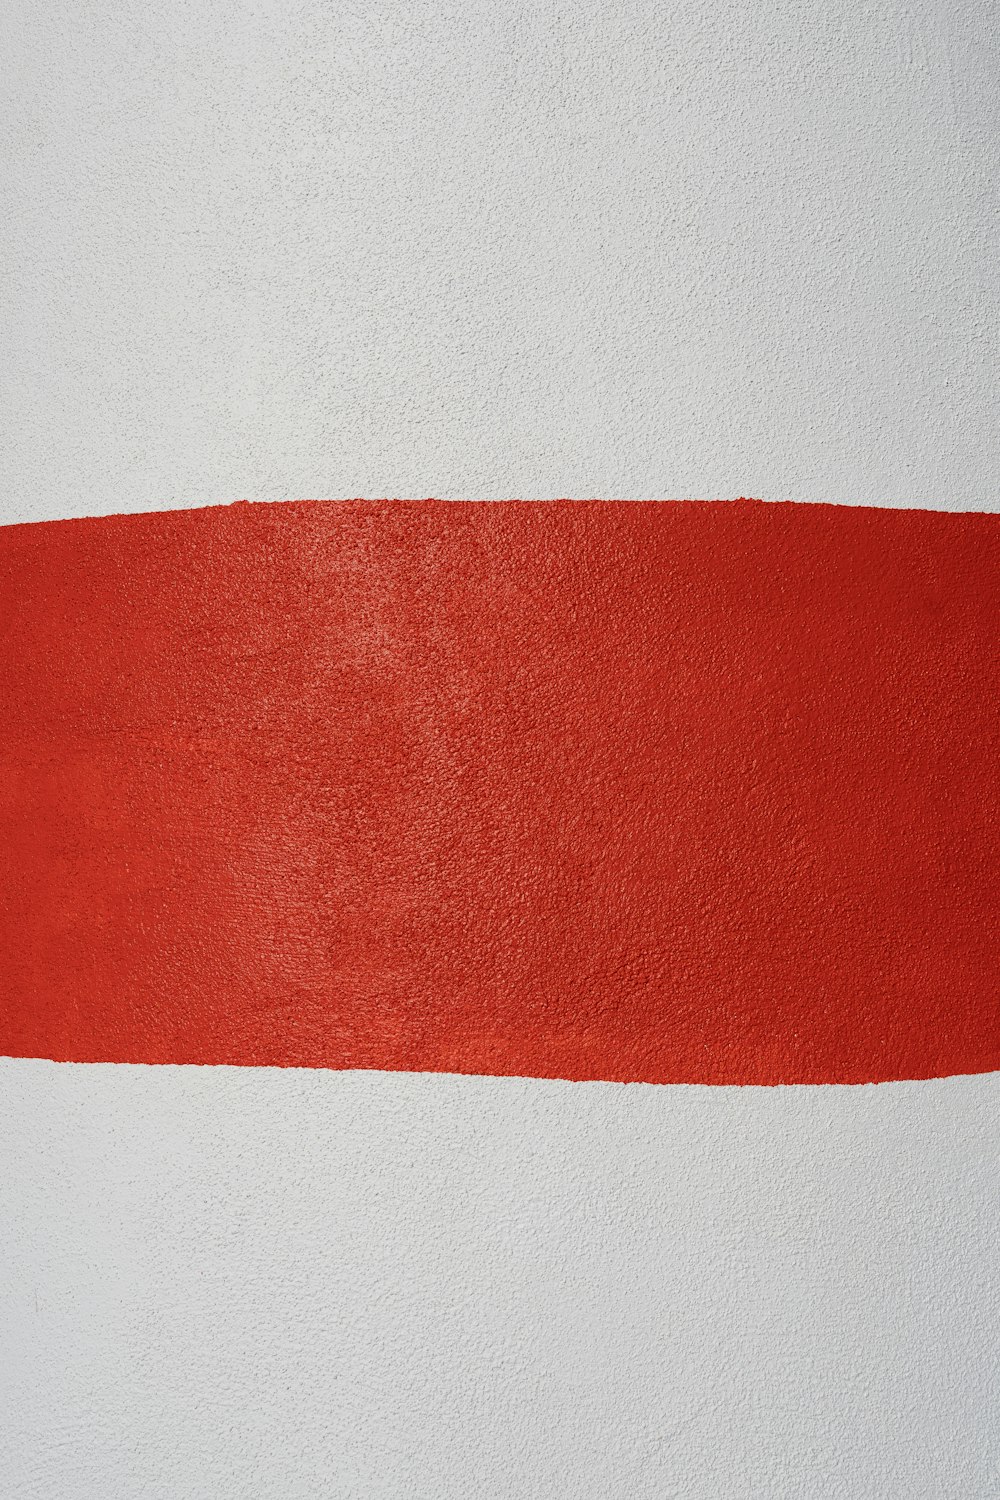 a white wall with a red strip painted on it